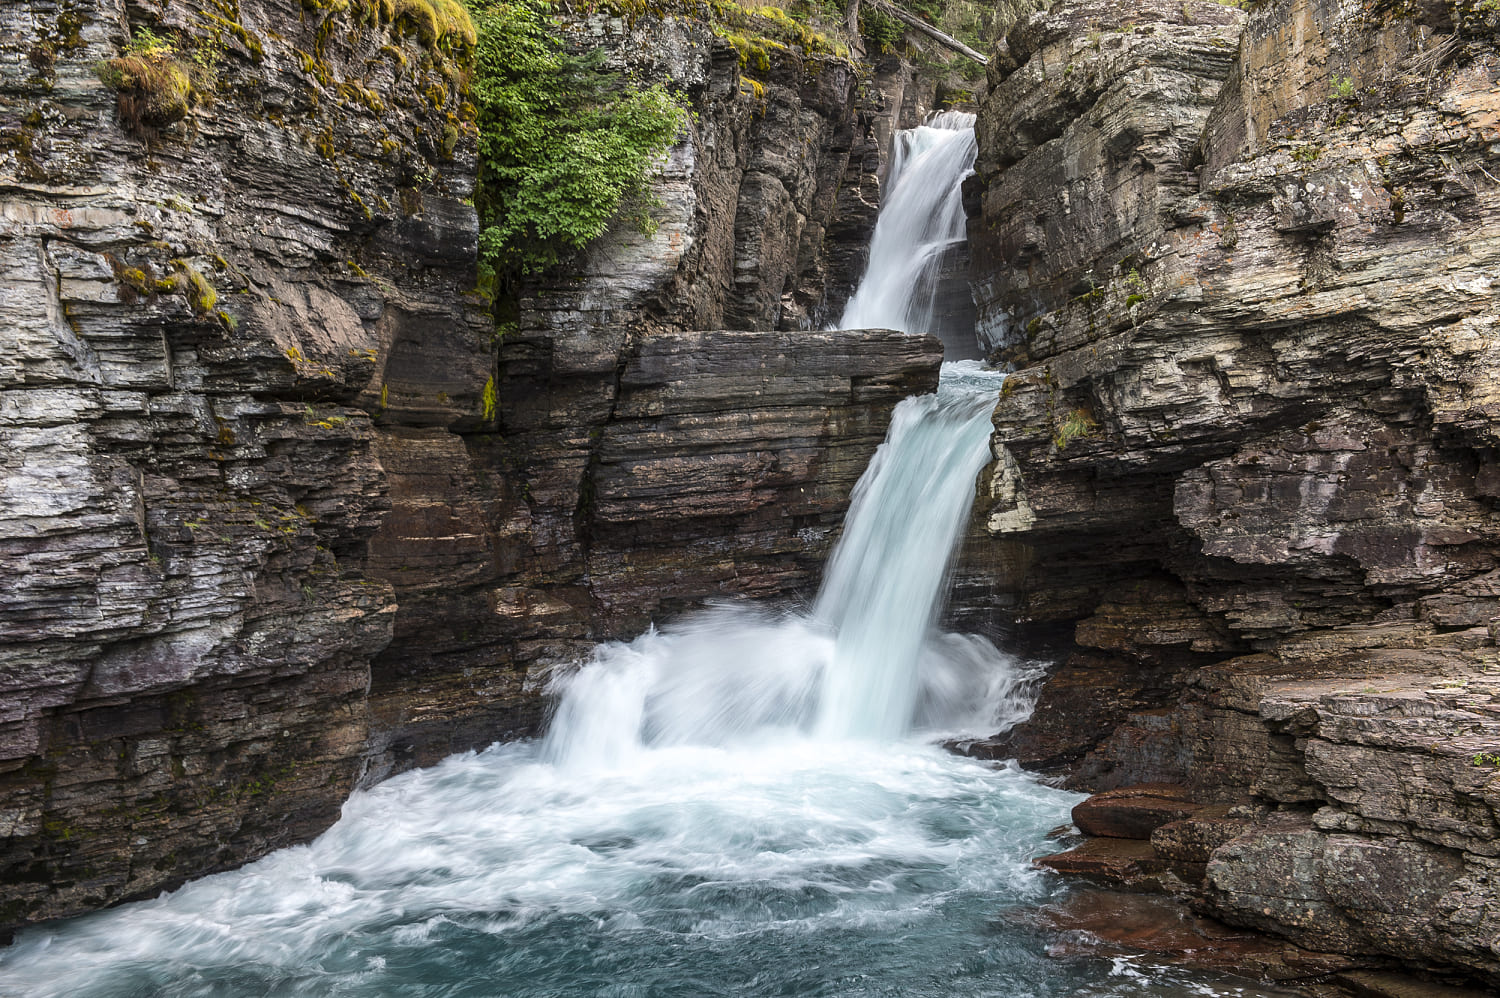 Pennsylvania woman drowns after getting swept over waterfalls at Glacier National Park